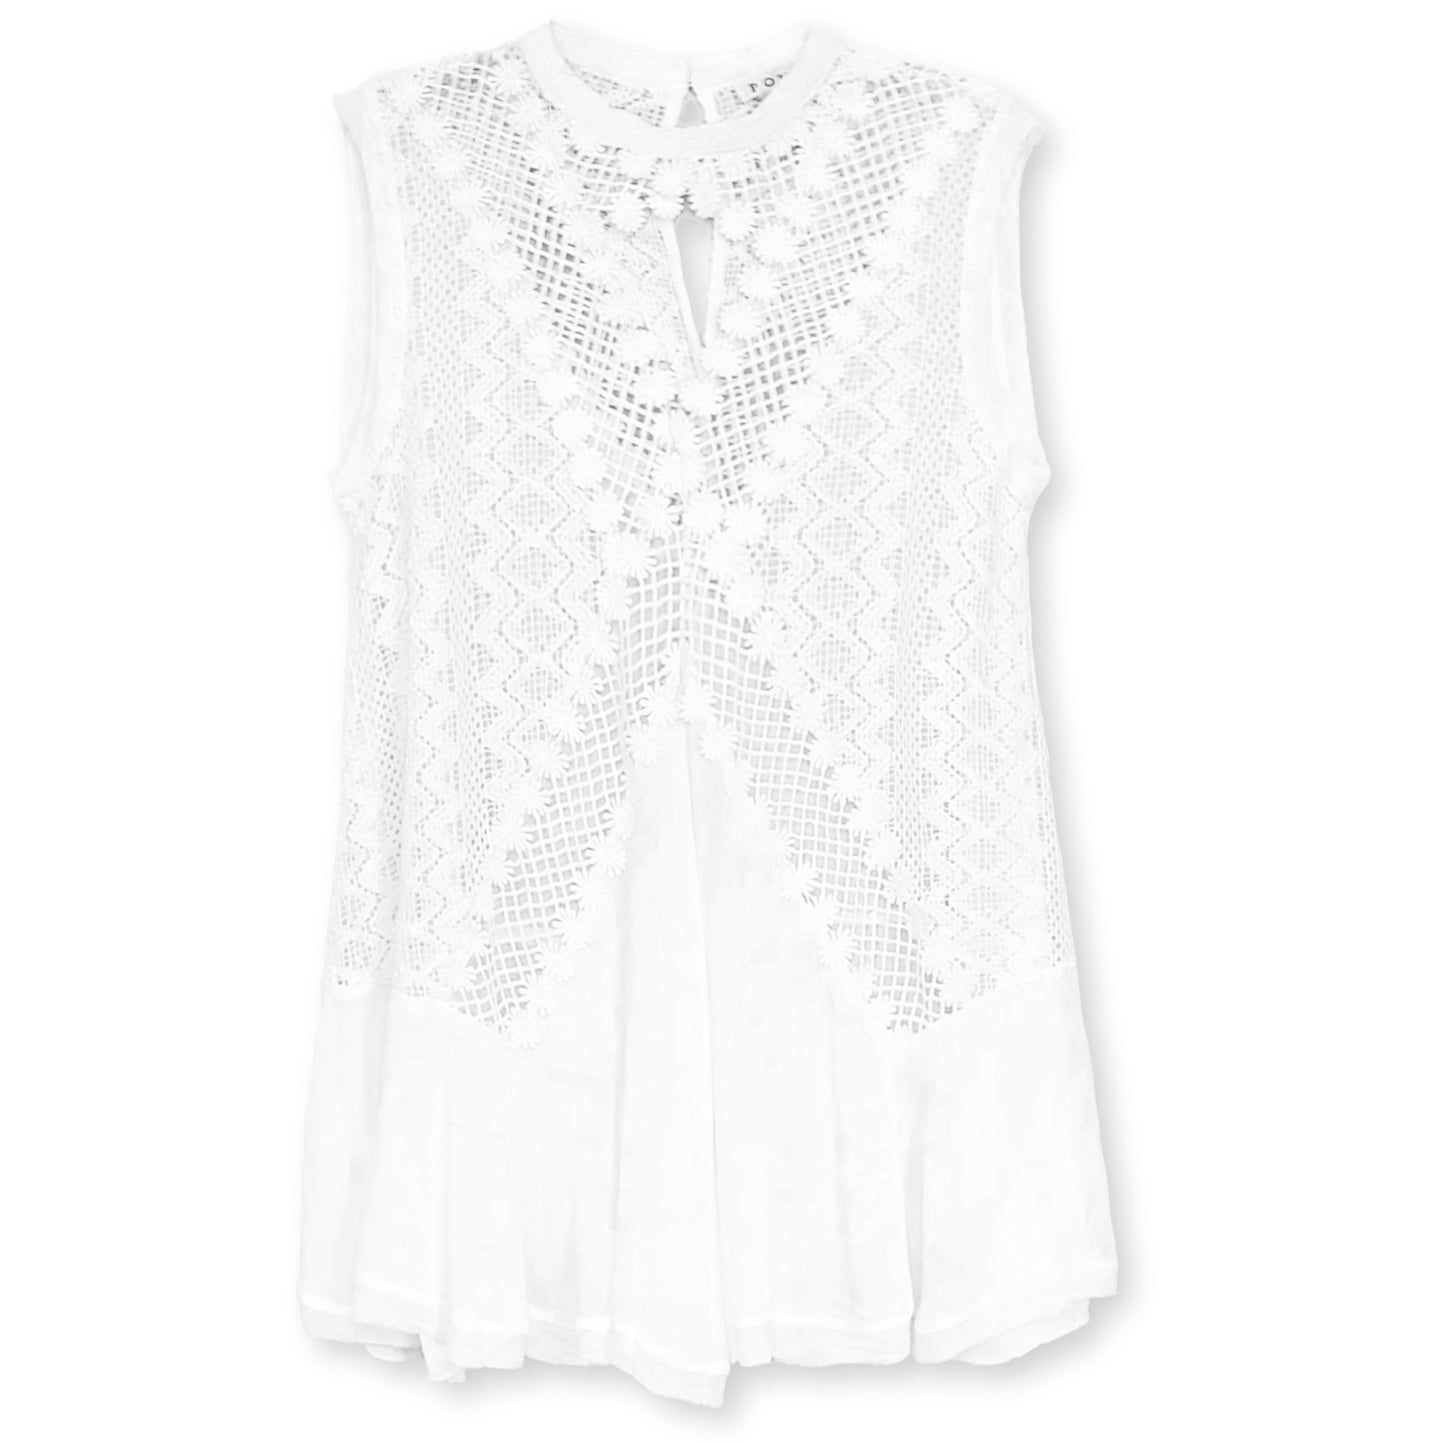 POL Crochet Lace High Neck with Keyhole Flowy Blouse Tunic Top